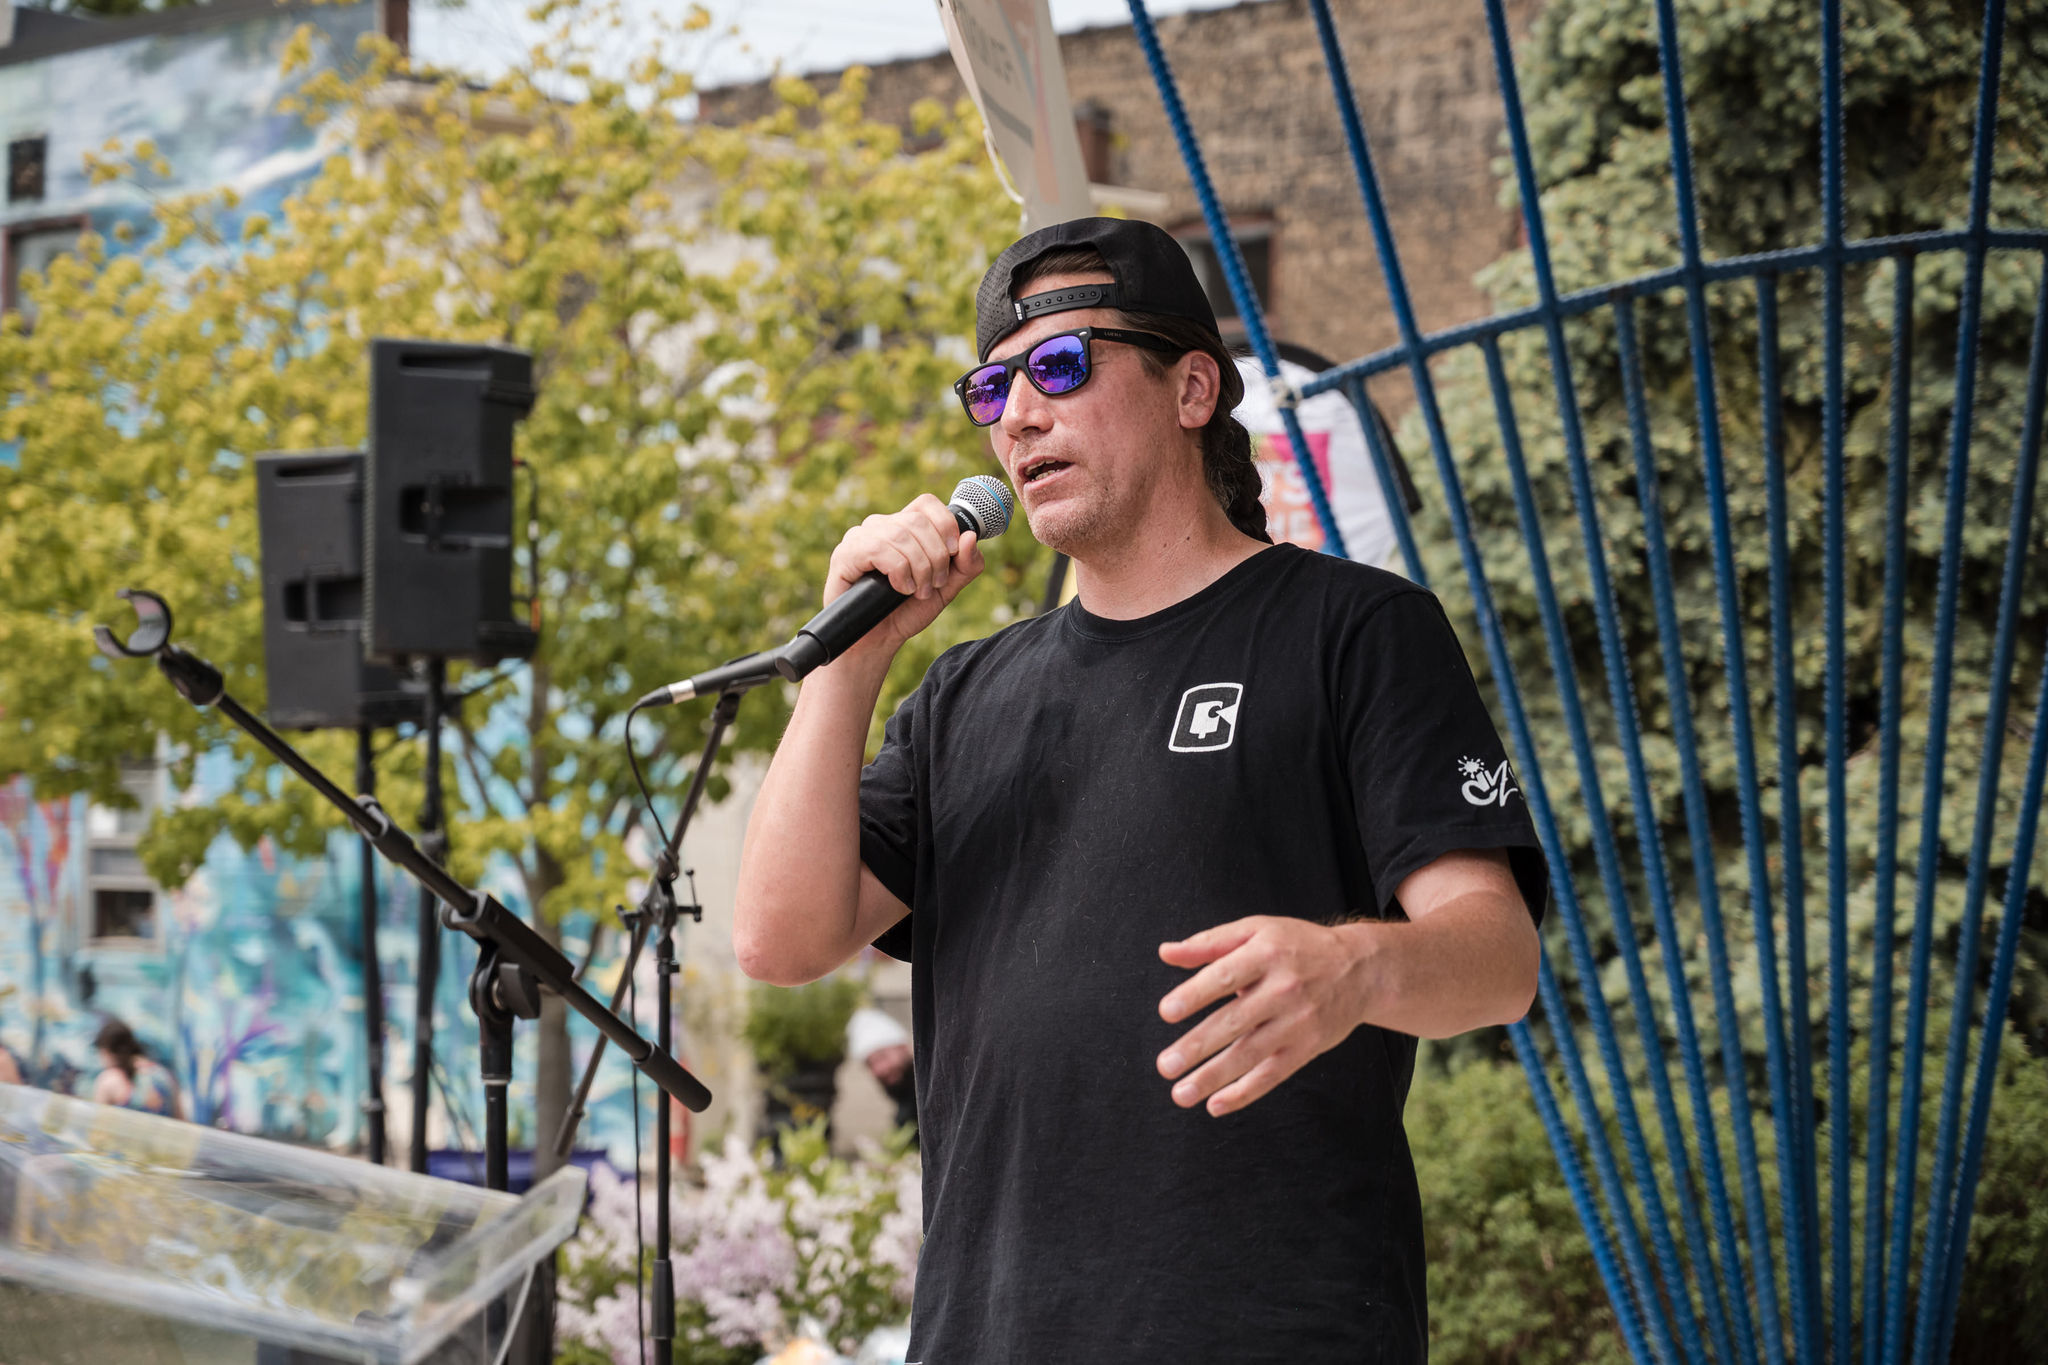 Indigenous artist and rapper Que Rock speaks into a microphone.